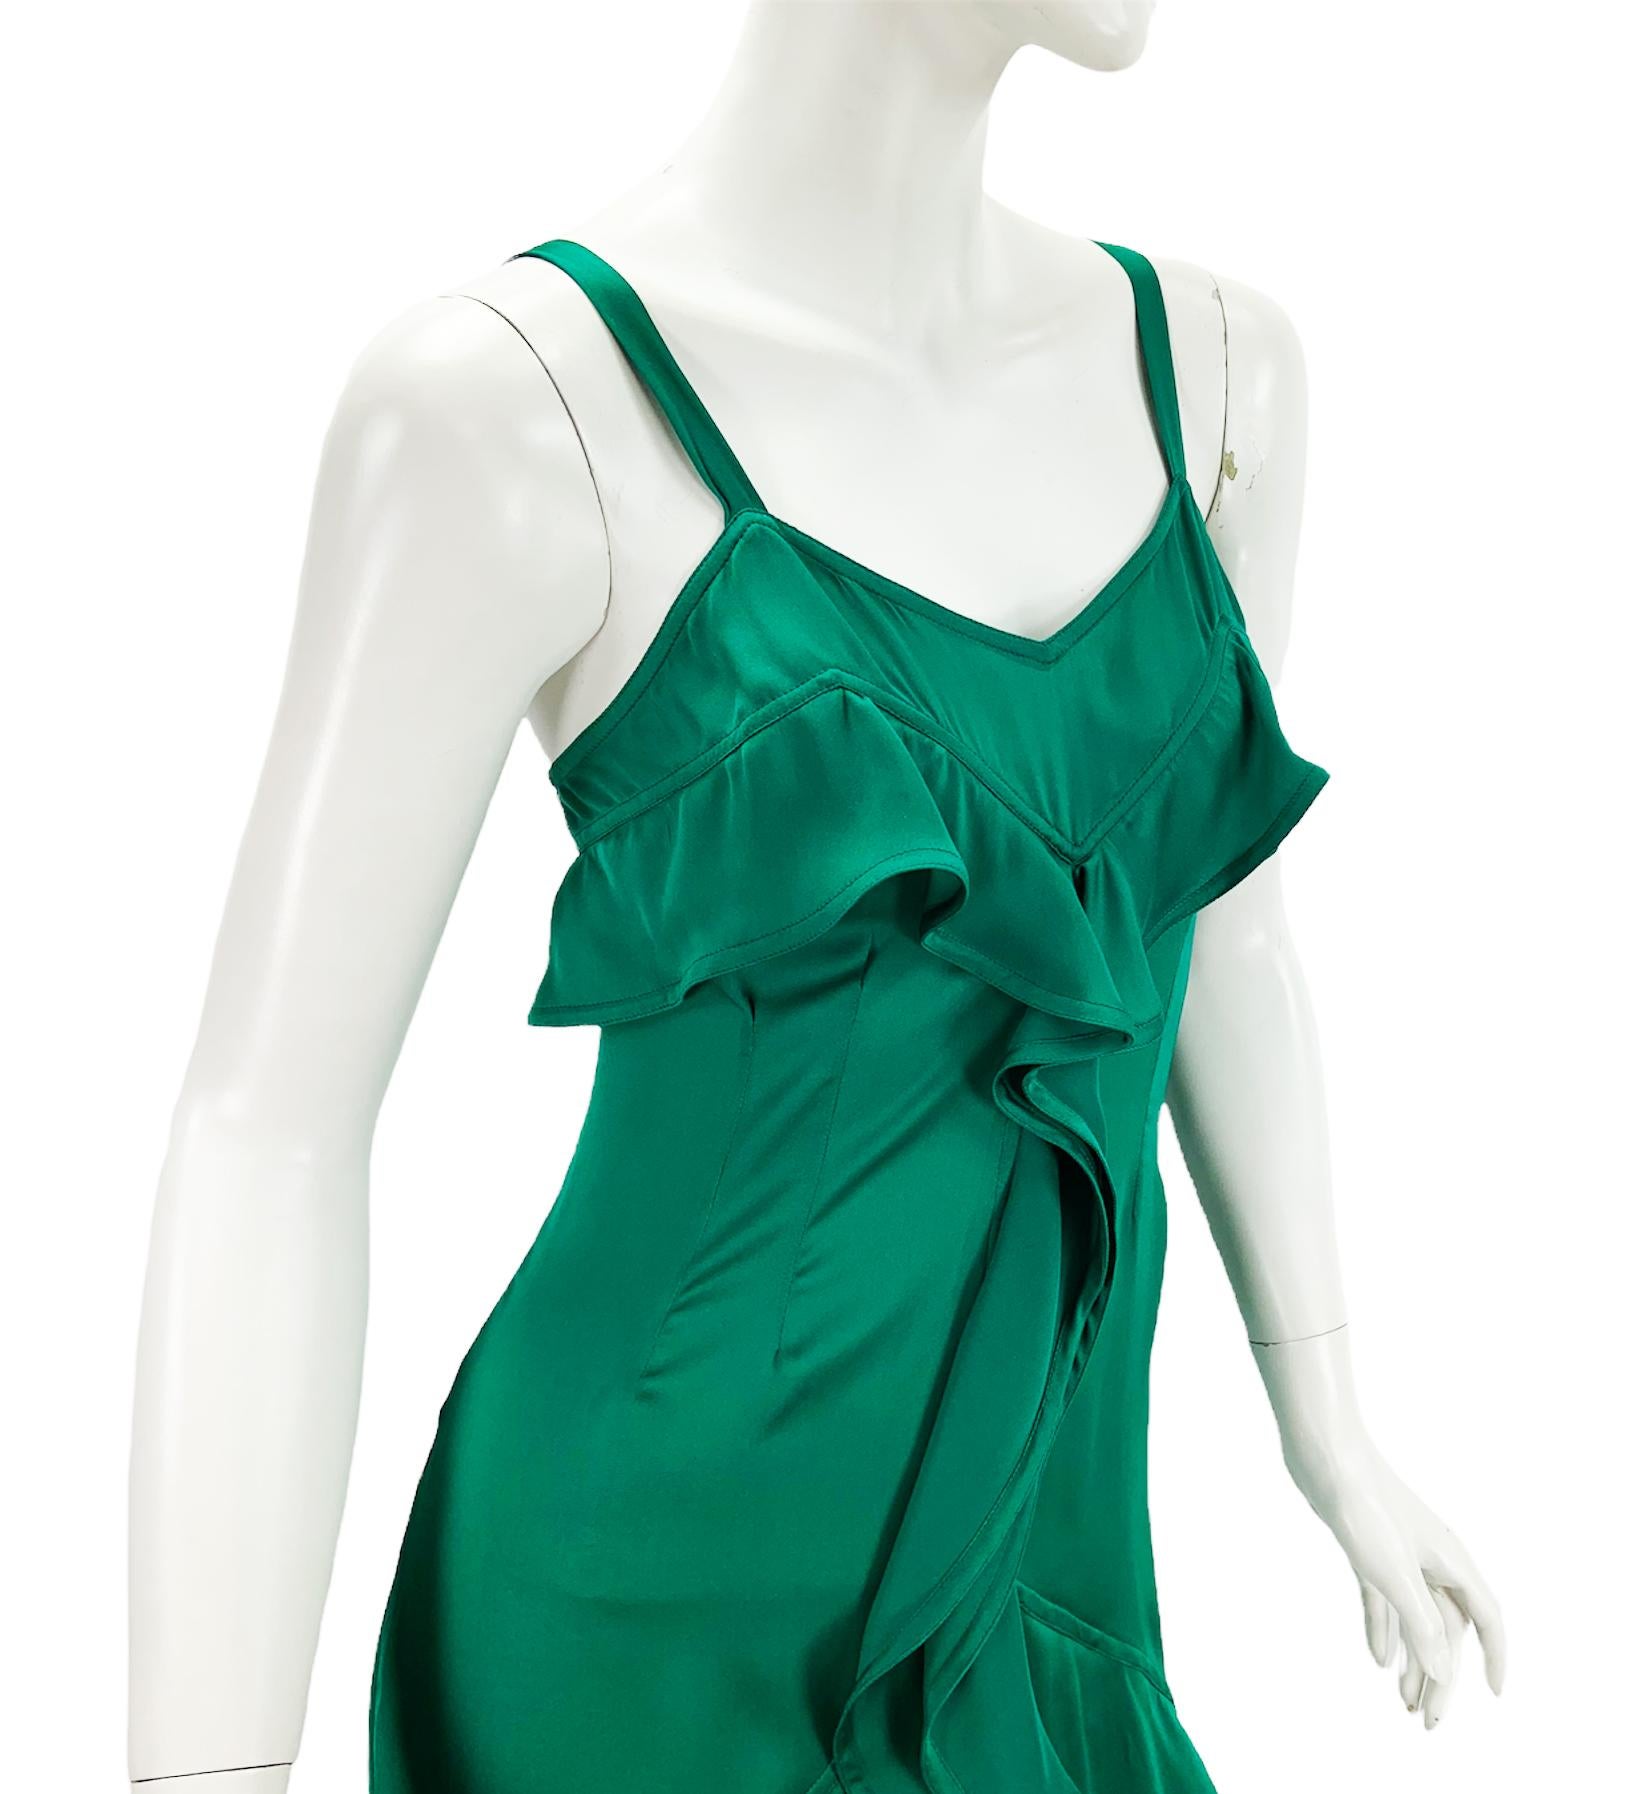 Tom Ford for Yves Saint Laurent AD Campaign F/W 2003 Silk Green Ruffle Dress   For Sale 2